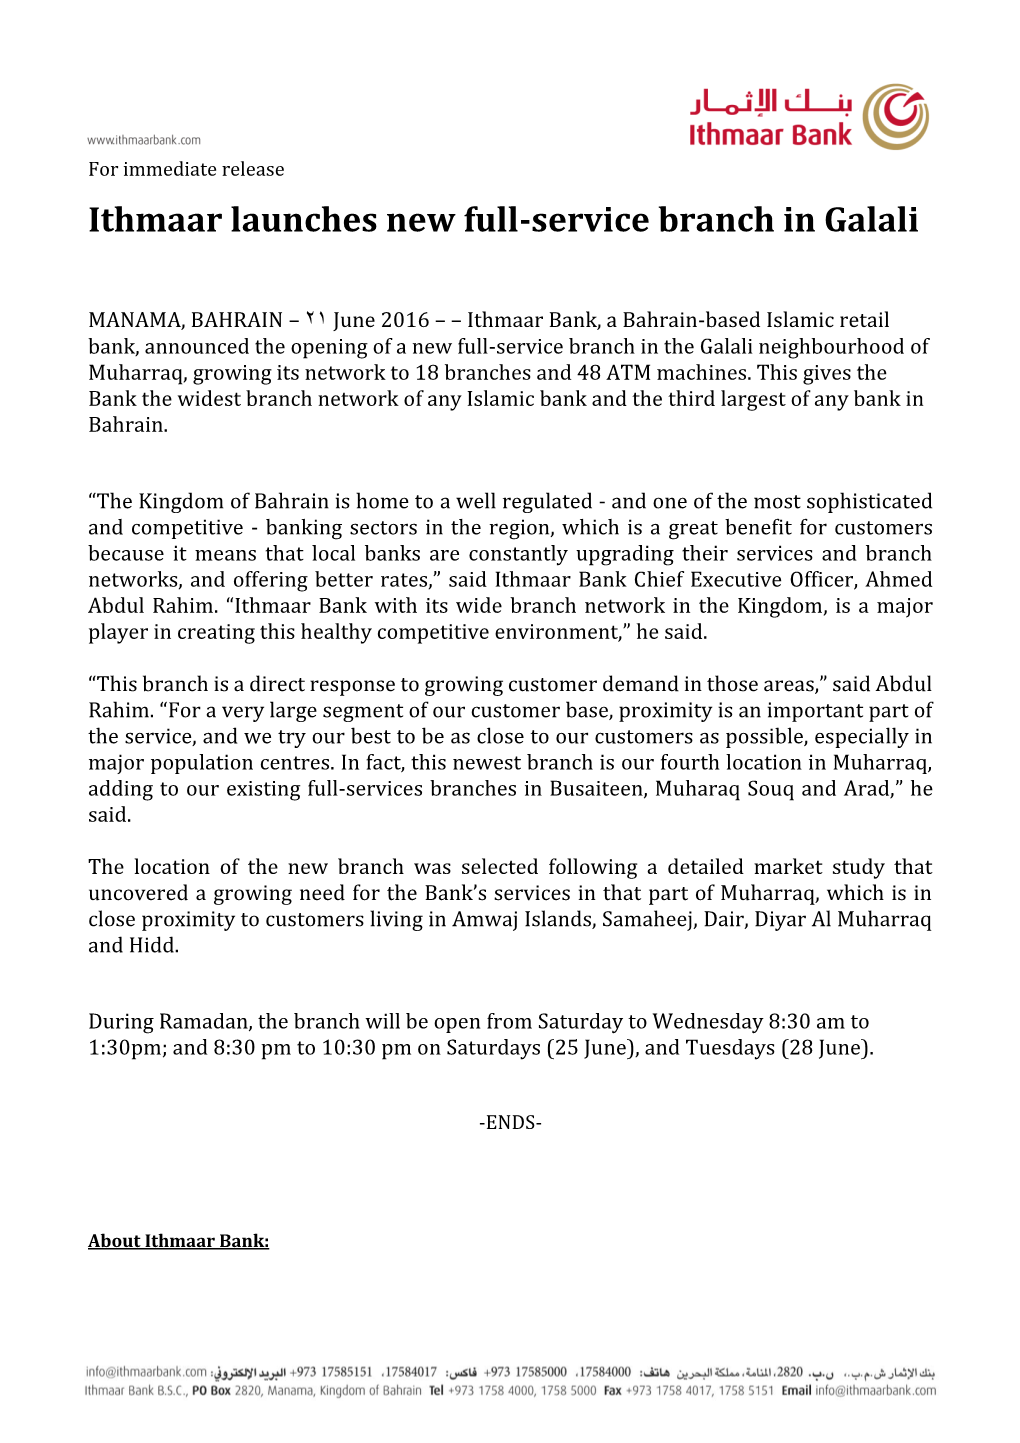 Ithmaar Launches New Full-Service Branch in Galali